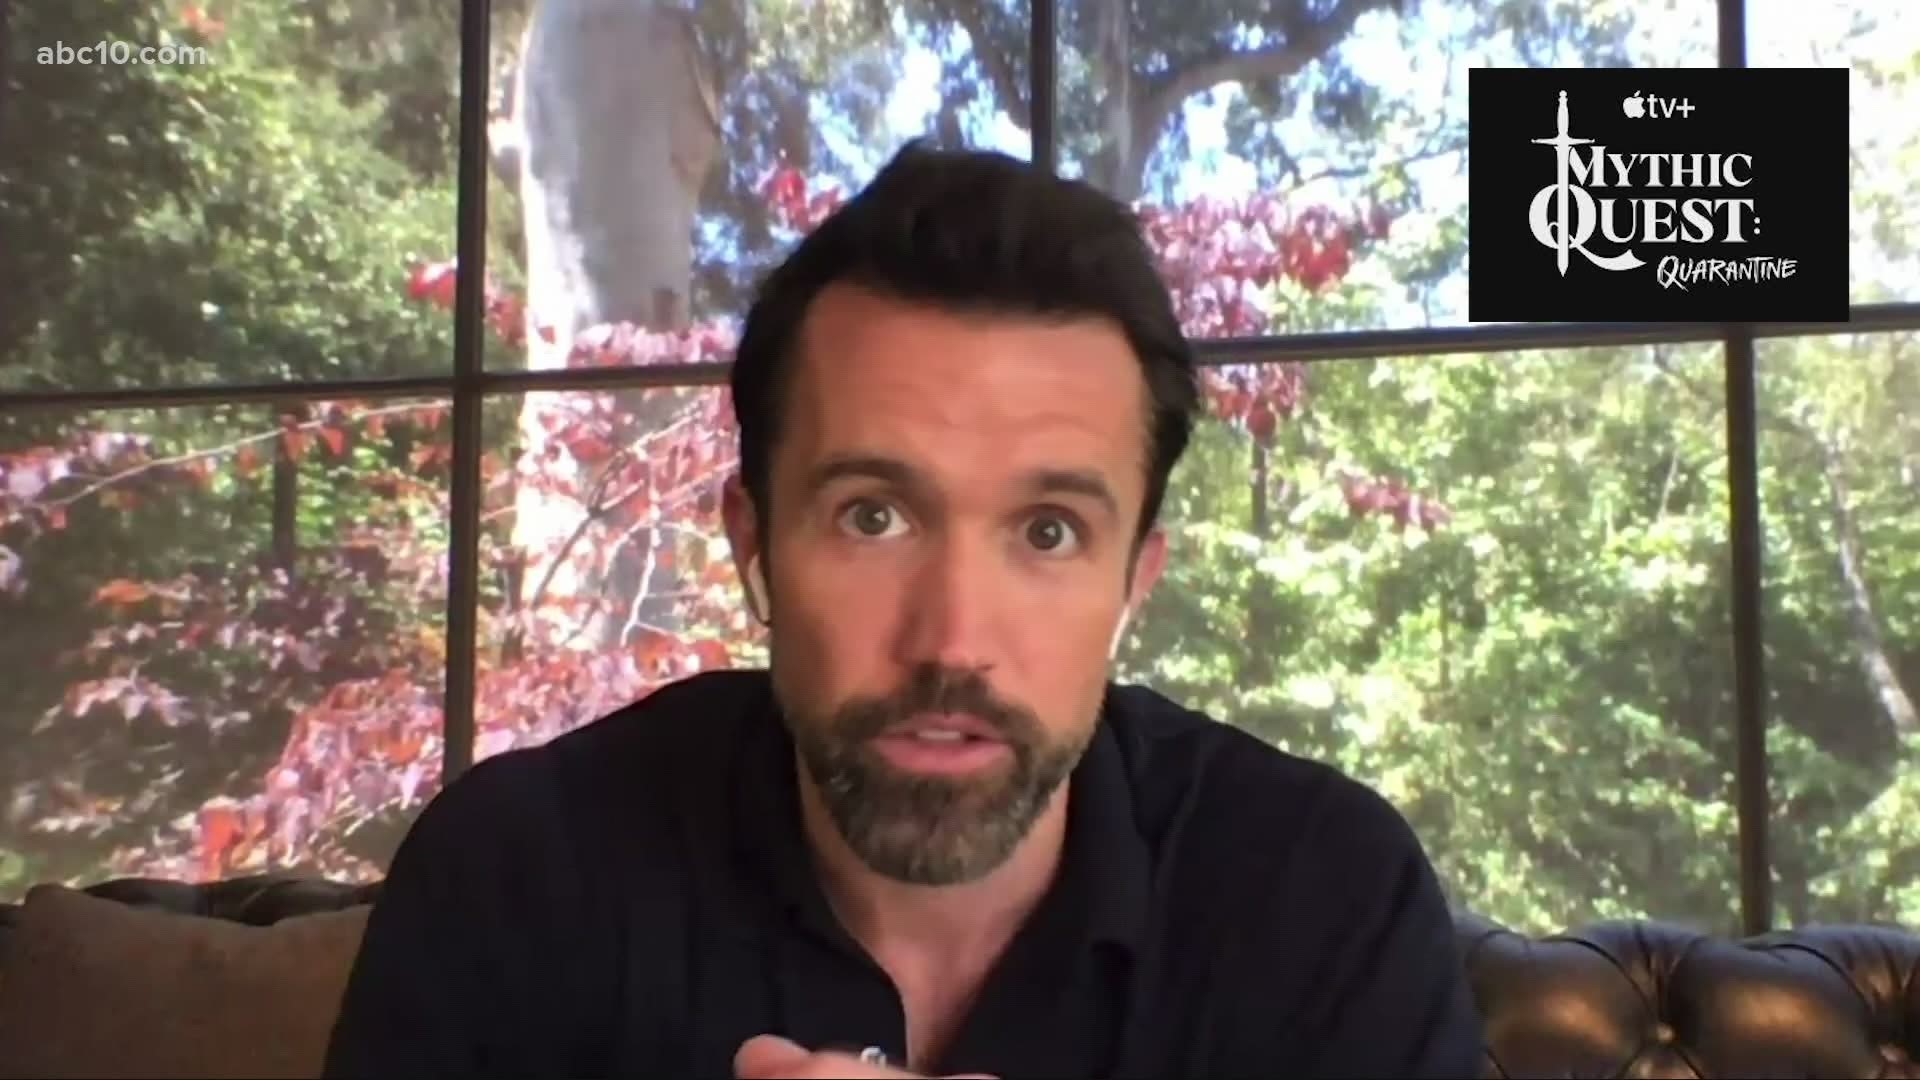 Actor Rob Mcelhenney chats with Mark S. Allen about his show 'Mythic Quest" on AppleTV+ and the special quarantine episode created during coronavirus pandemic.